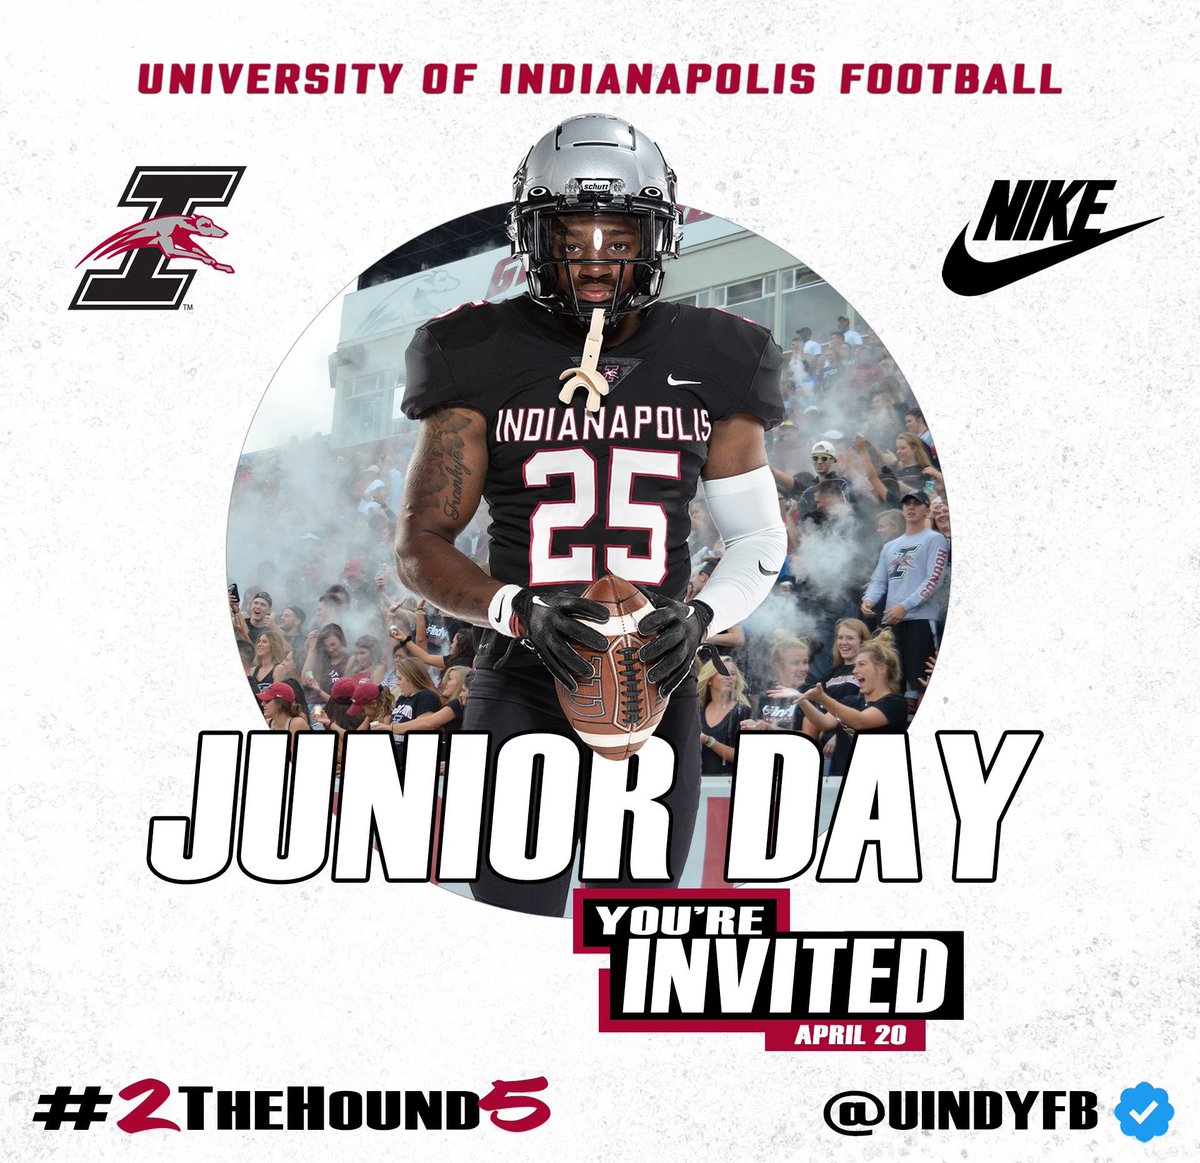 Thank you @coachburke89 for the Junior day invite @FRHS_Football @UIndyFB @CSmithScout